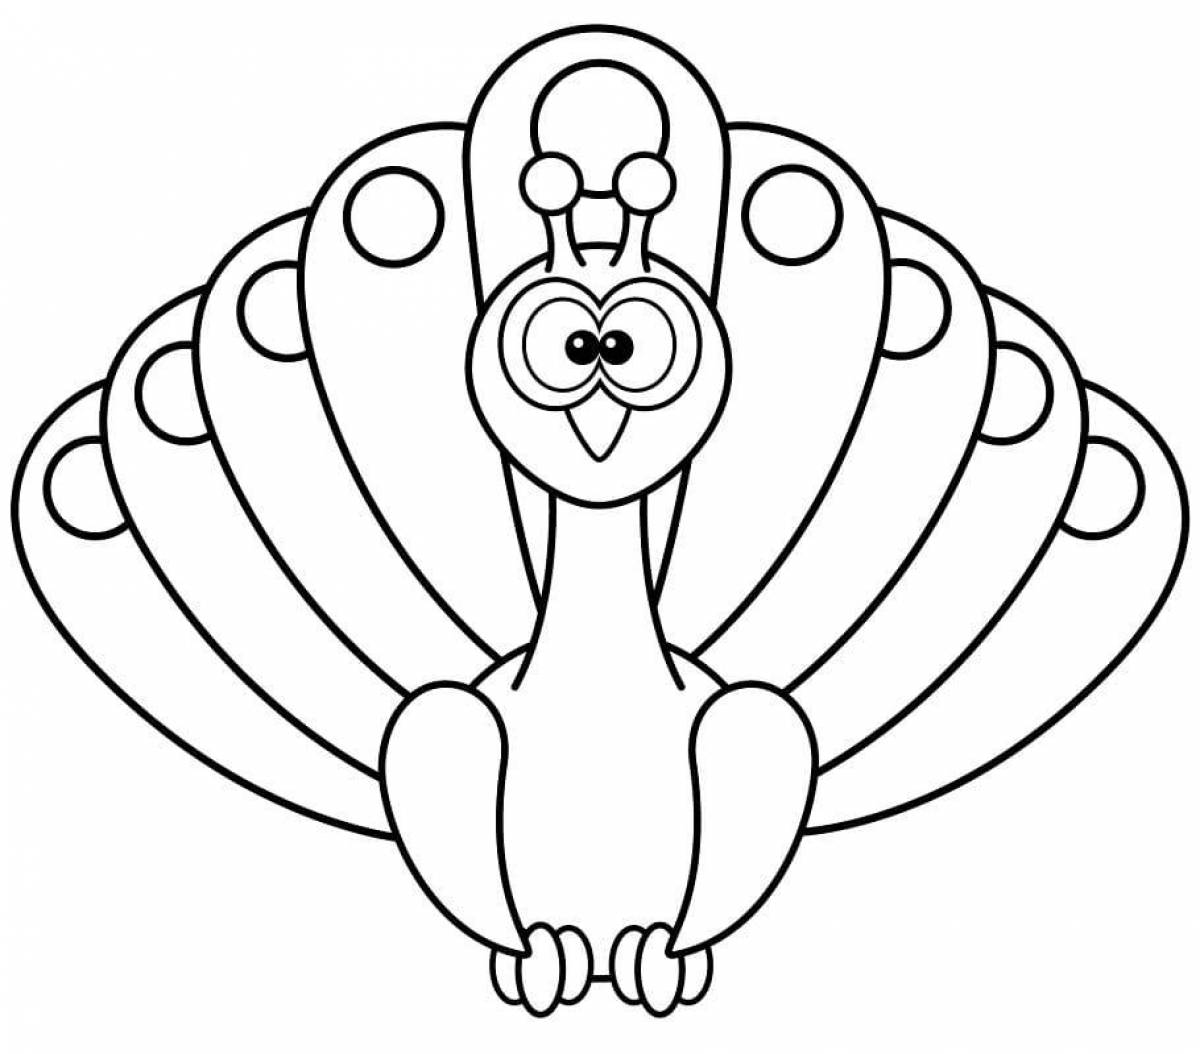 Outstanding peacock coloring page for kids